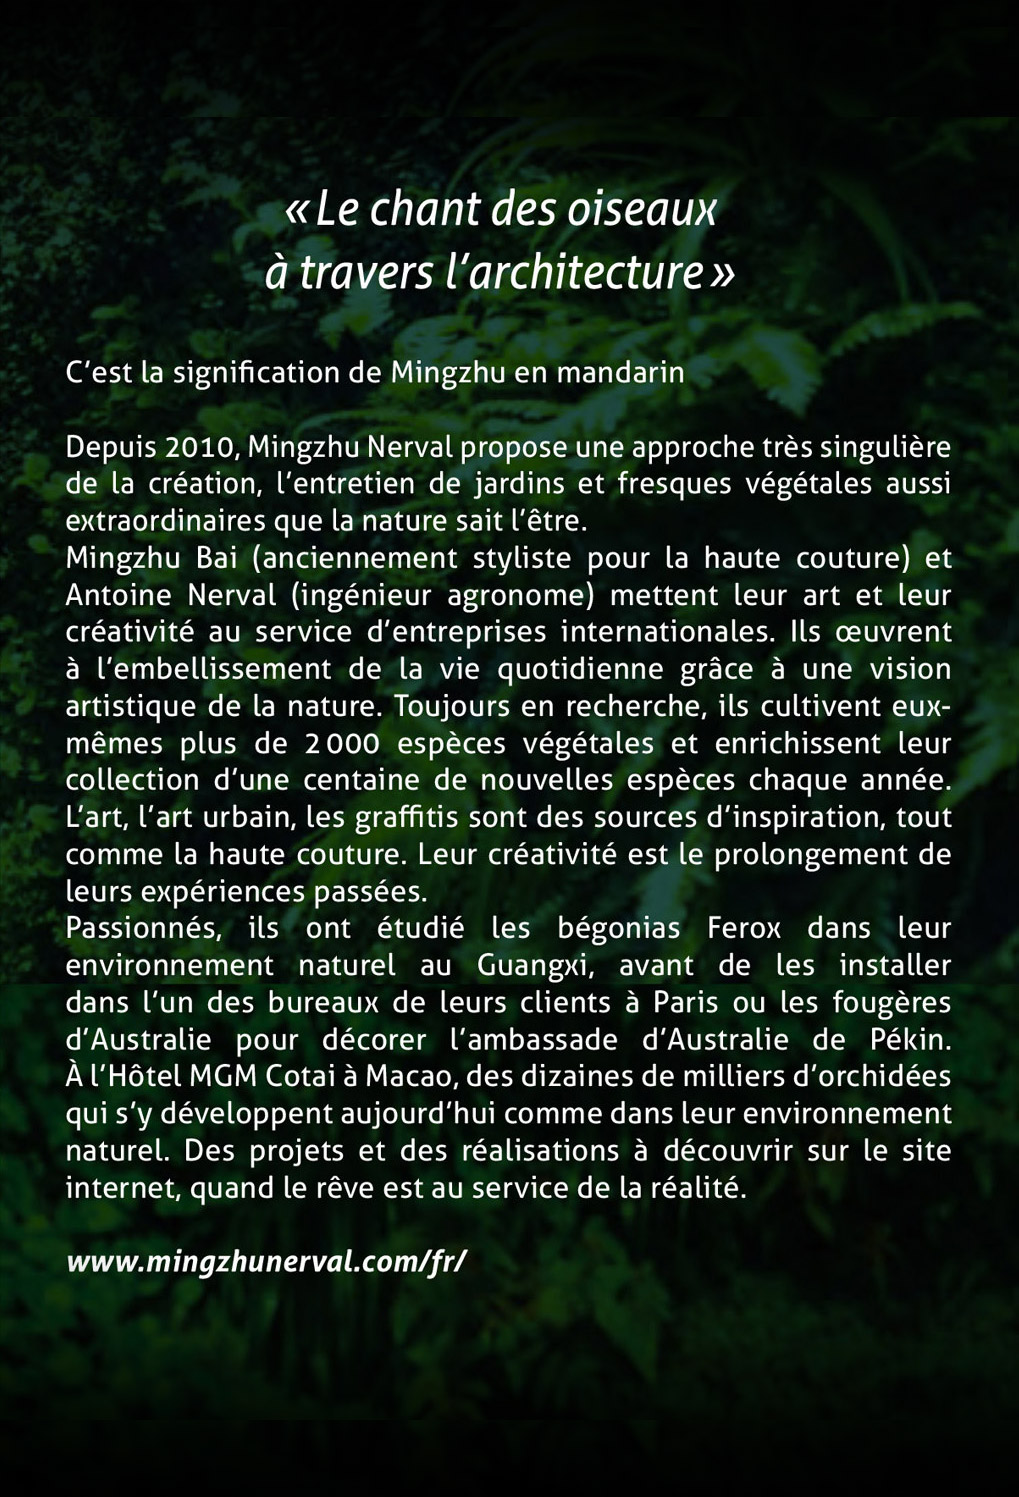 Ouest Magazine 2022 nature lifestyle with Mingzhu Nerval